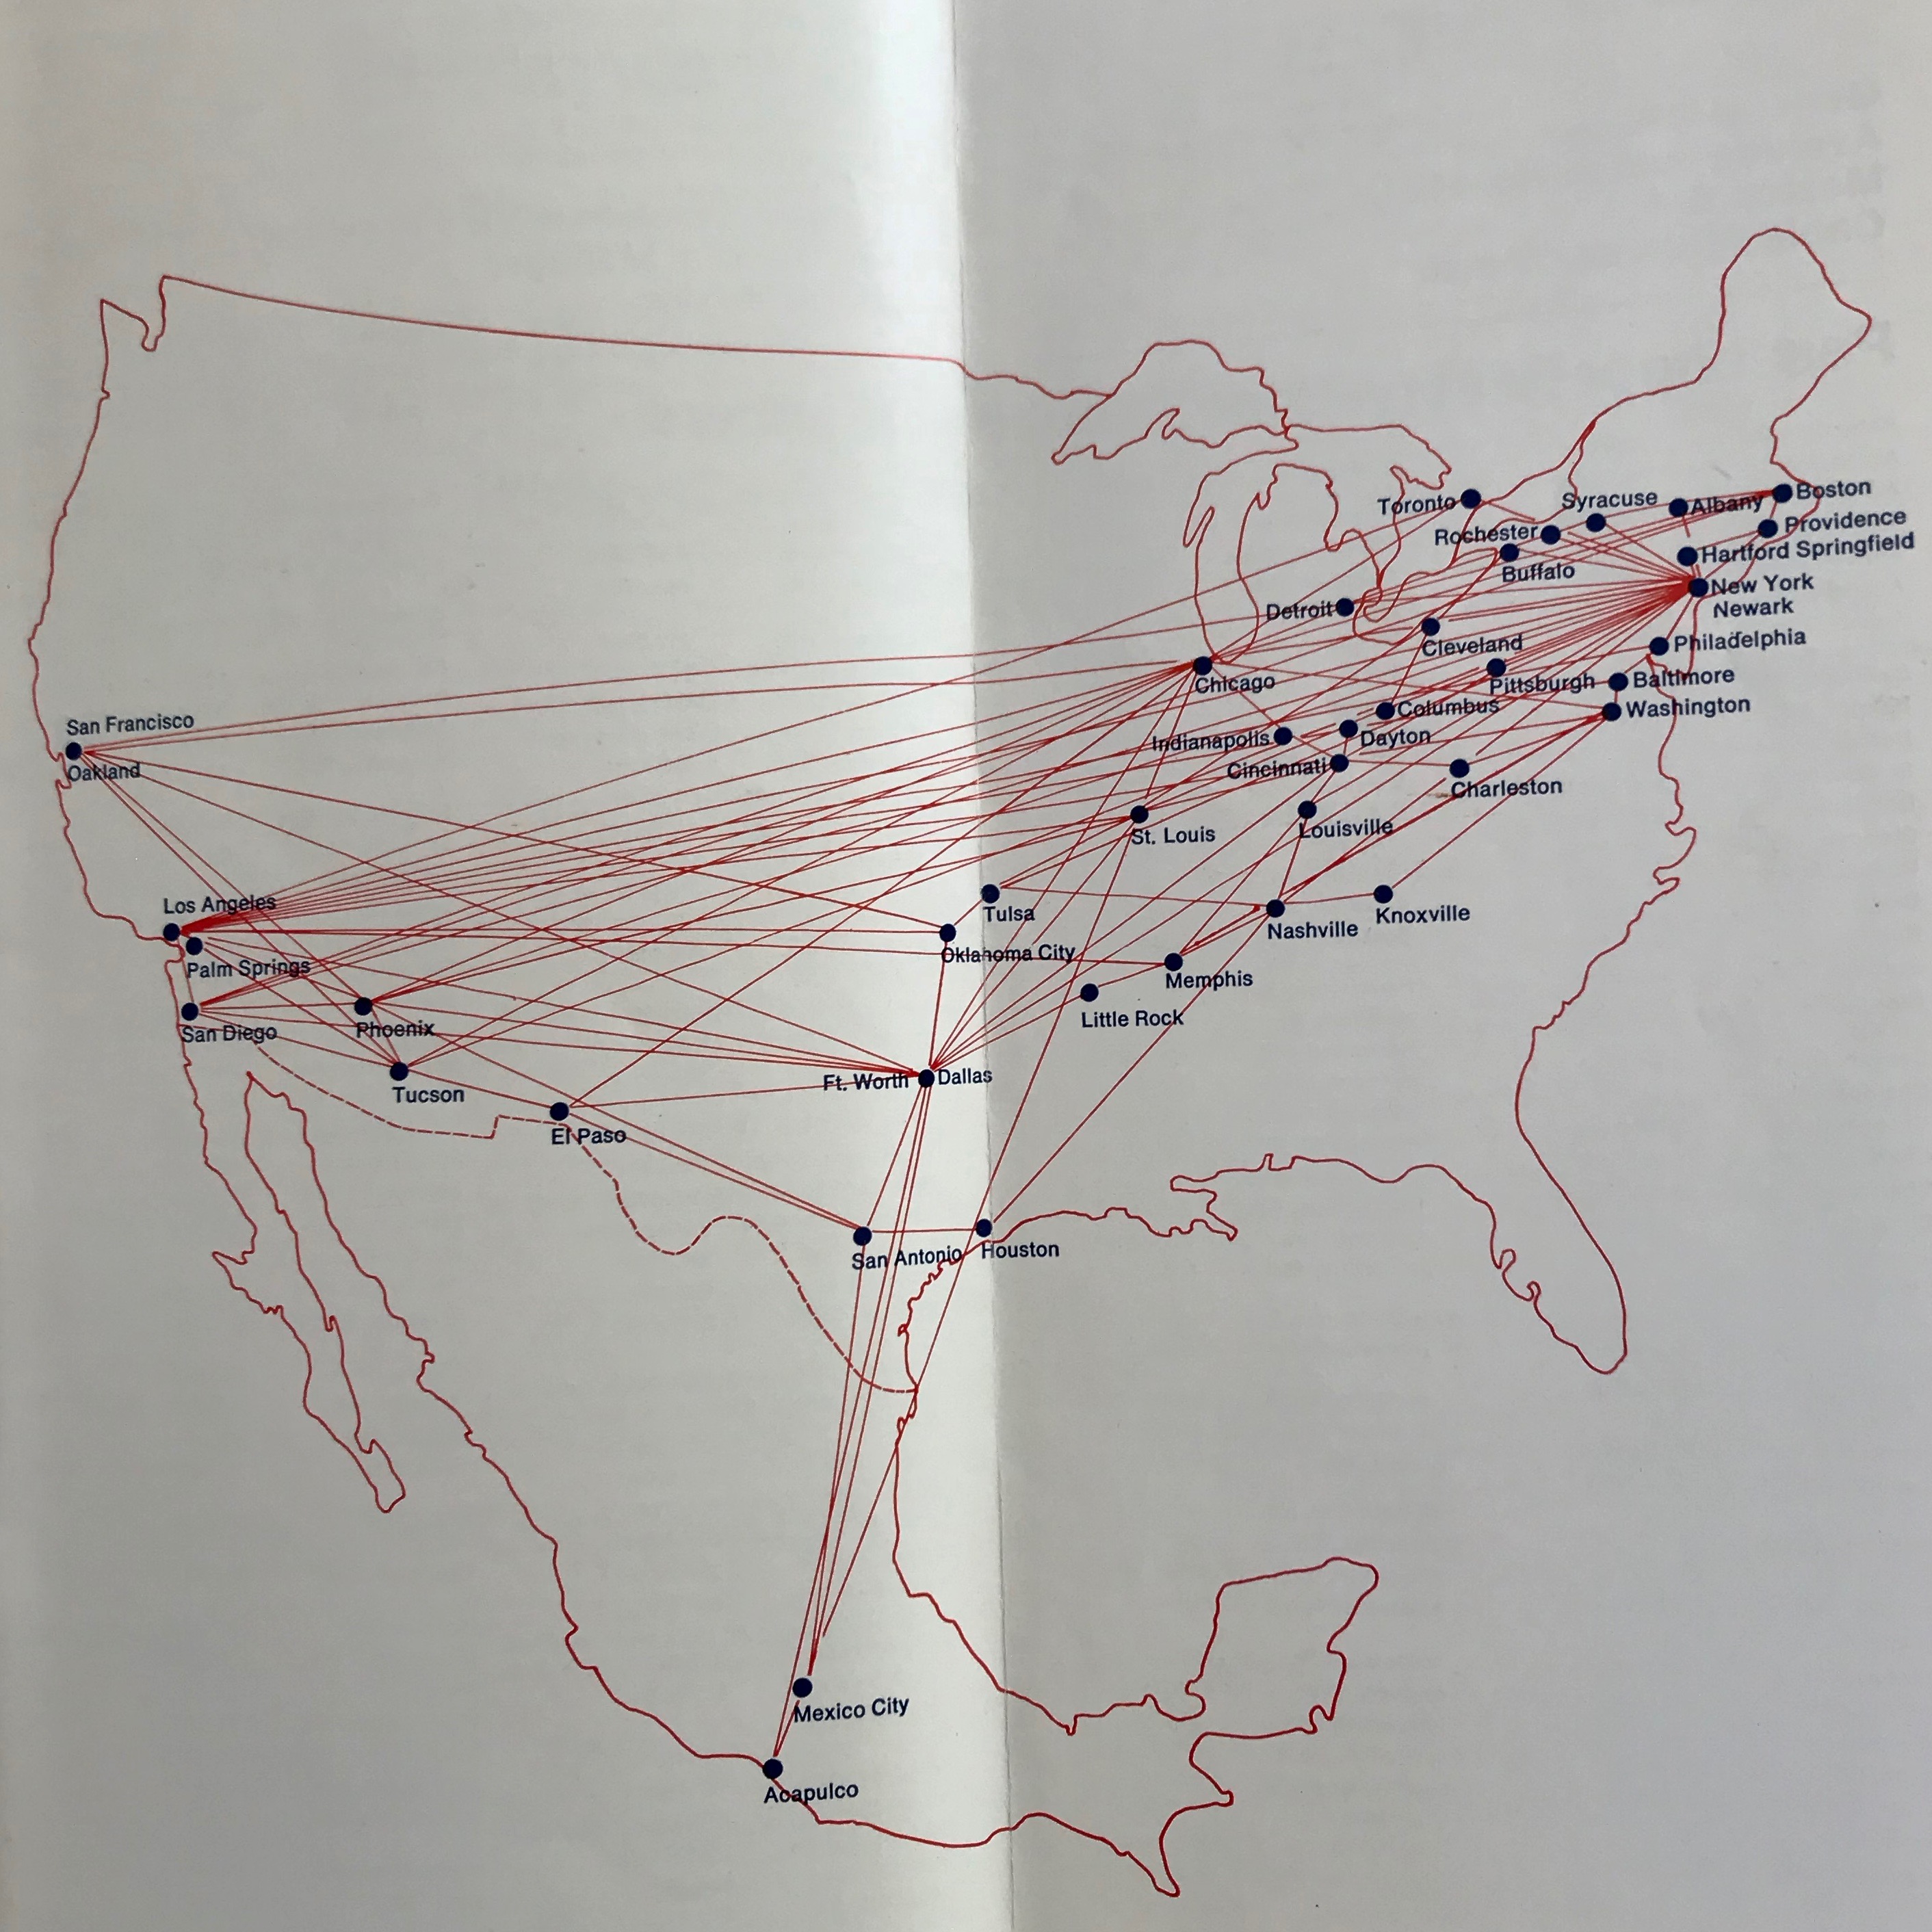 The 1969 route map of American Airlines shows black dots representing the various cities in the US connected by red lines that indicate flights available. 